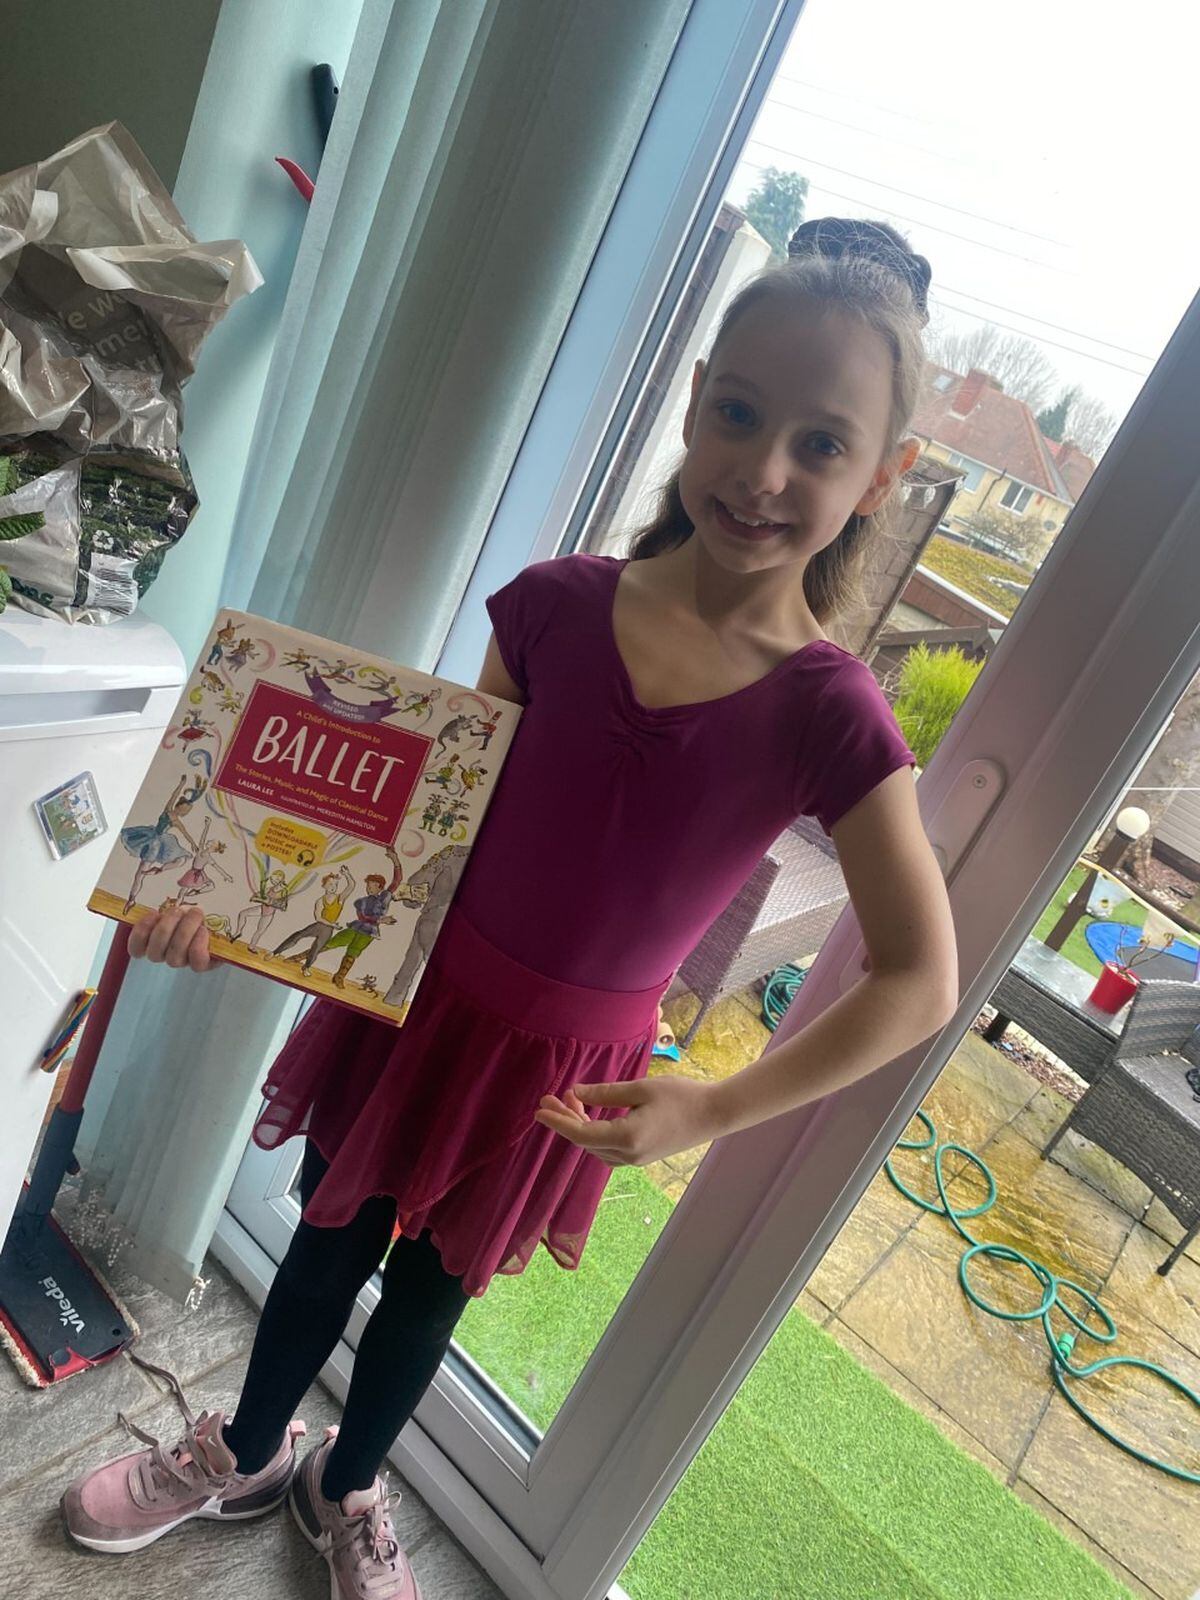 Lola Lonsdale, 9, is a talented ballerina.